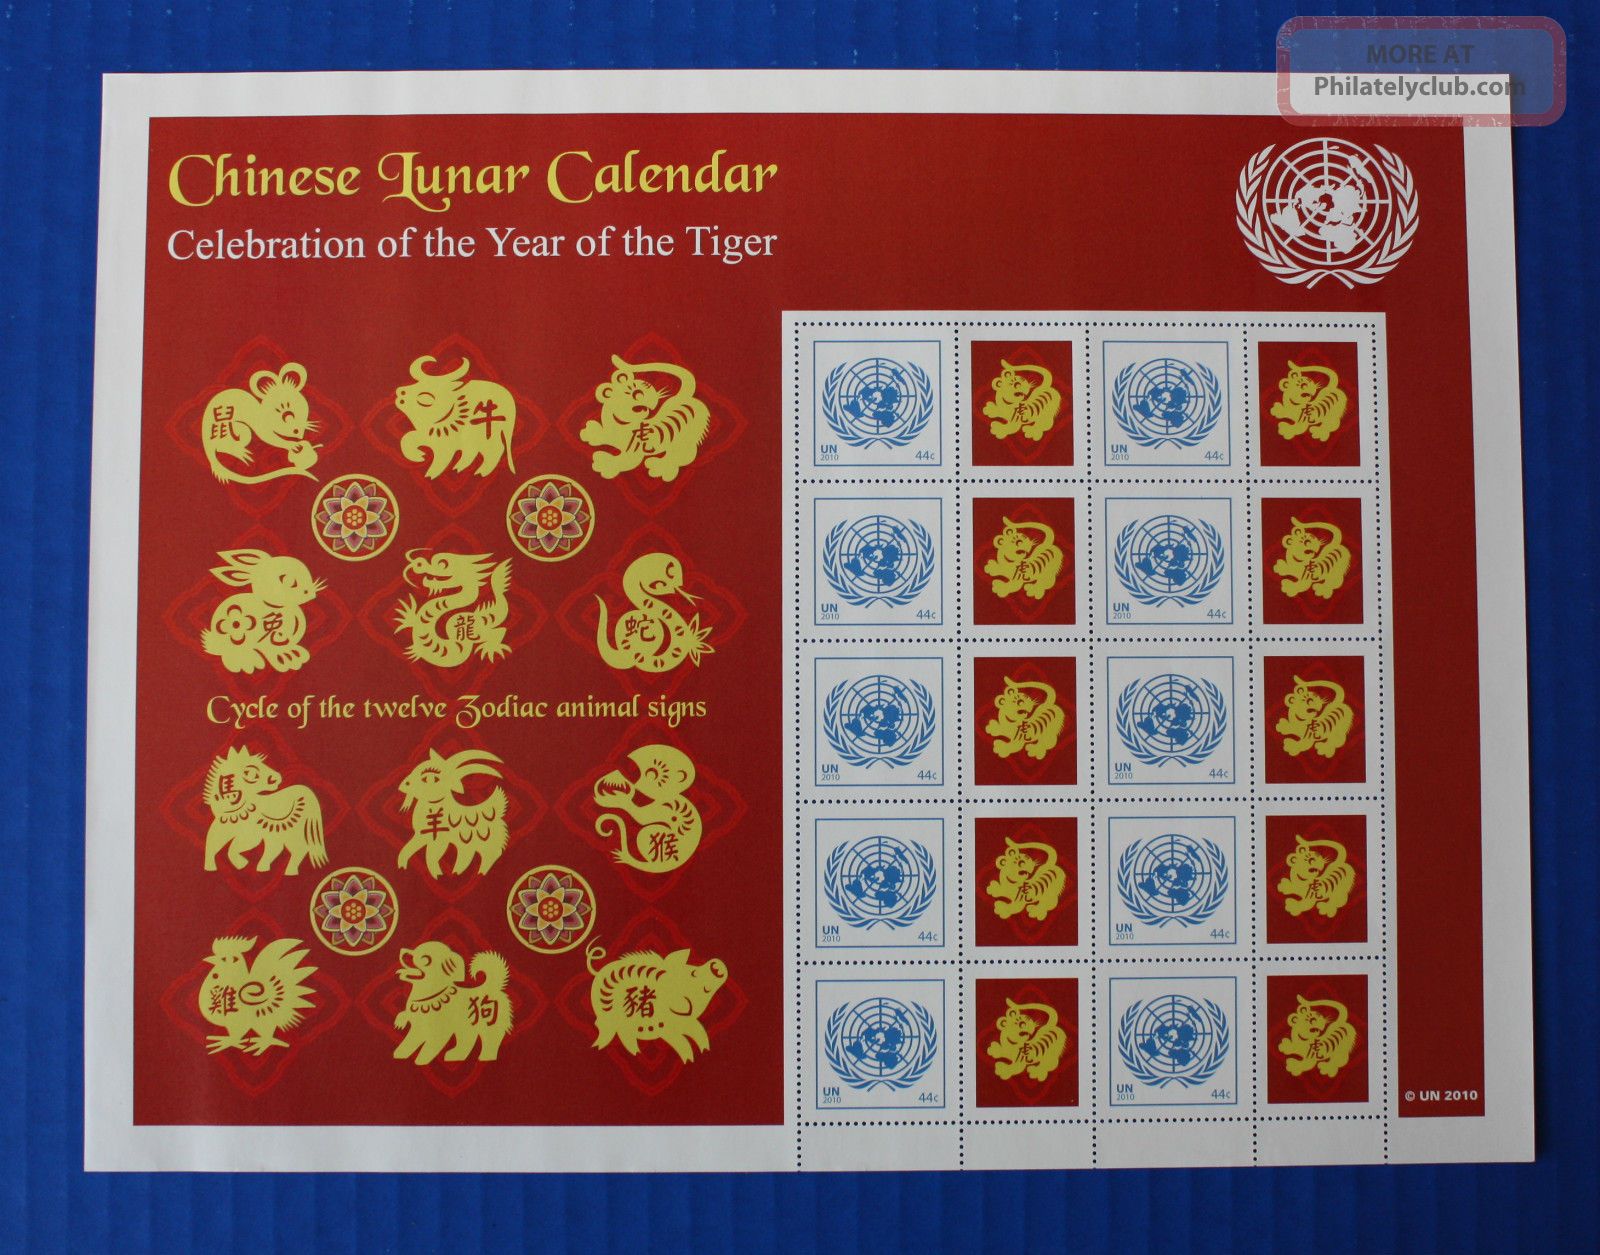 United Nations (s38) 2010 Lunar Calendar (tiger) Personalized Sheet Worldwide photo